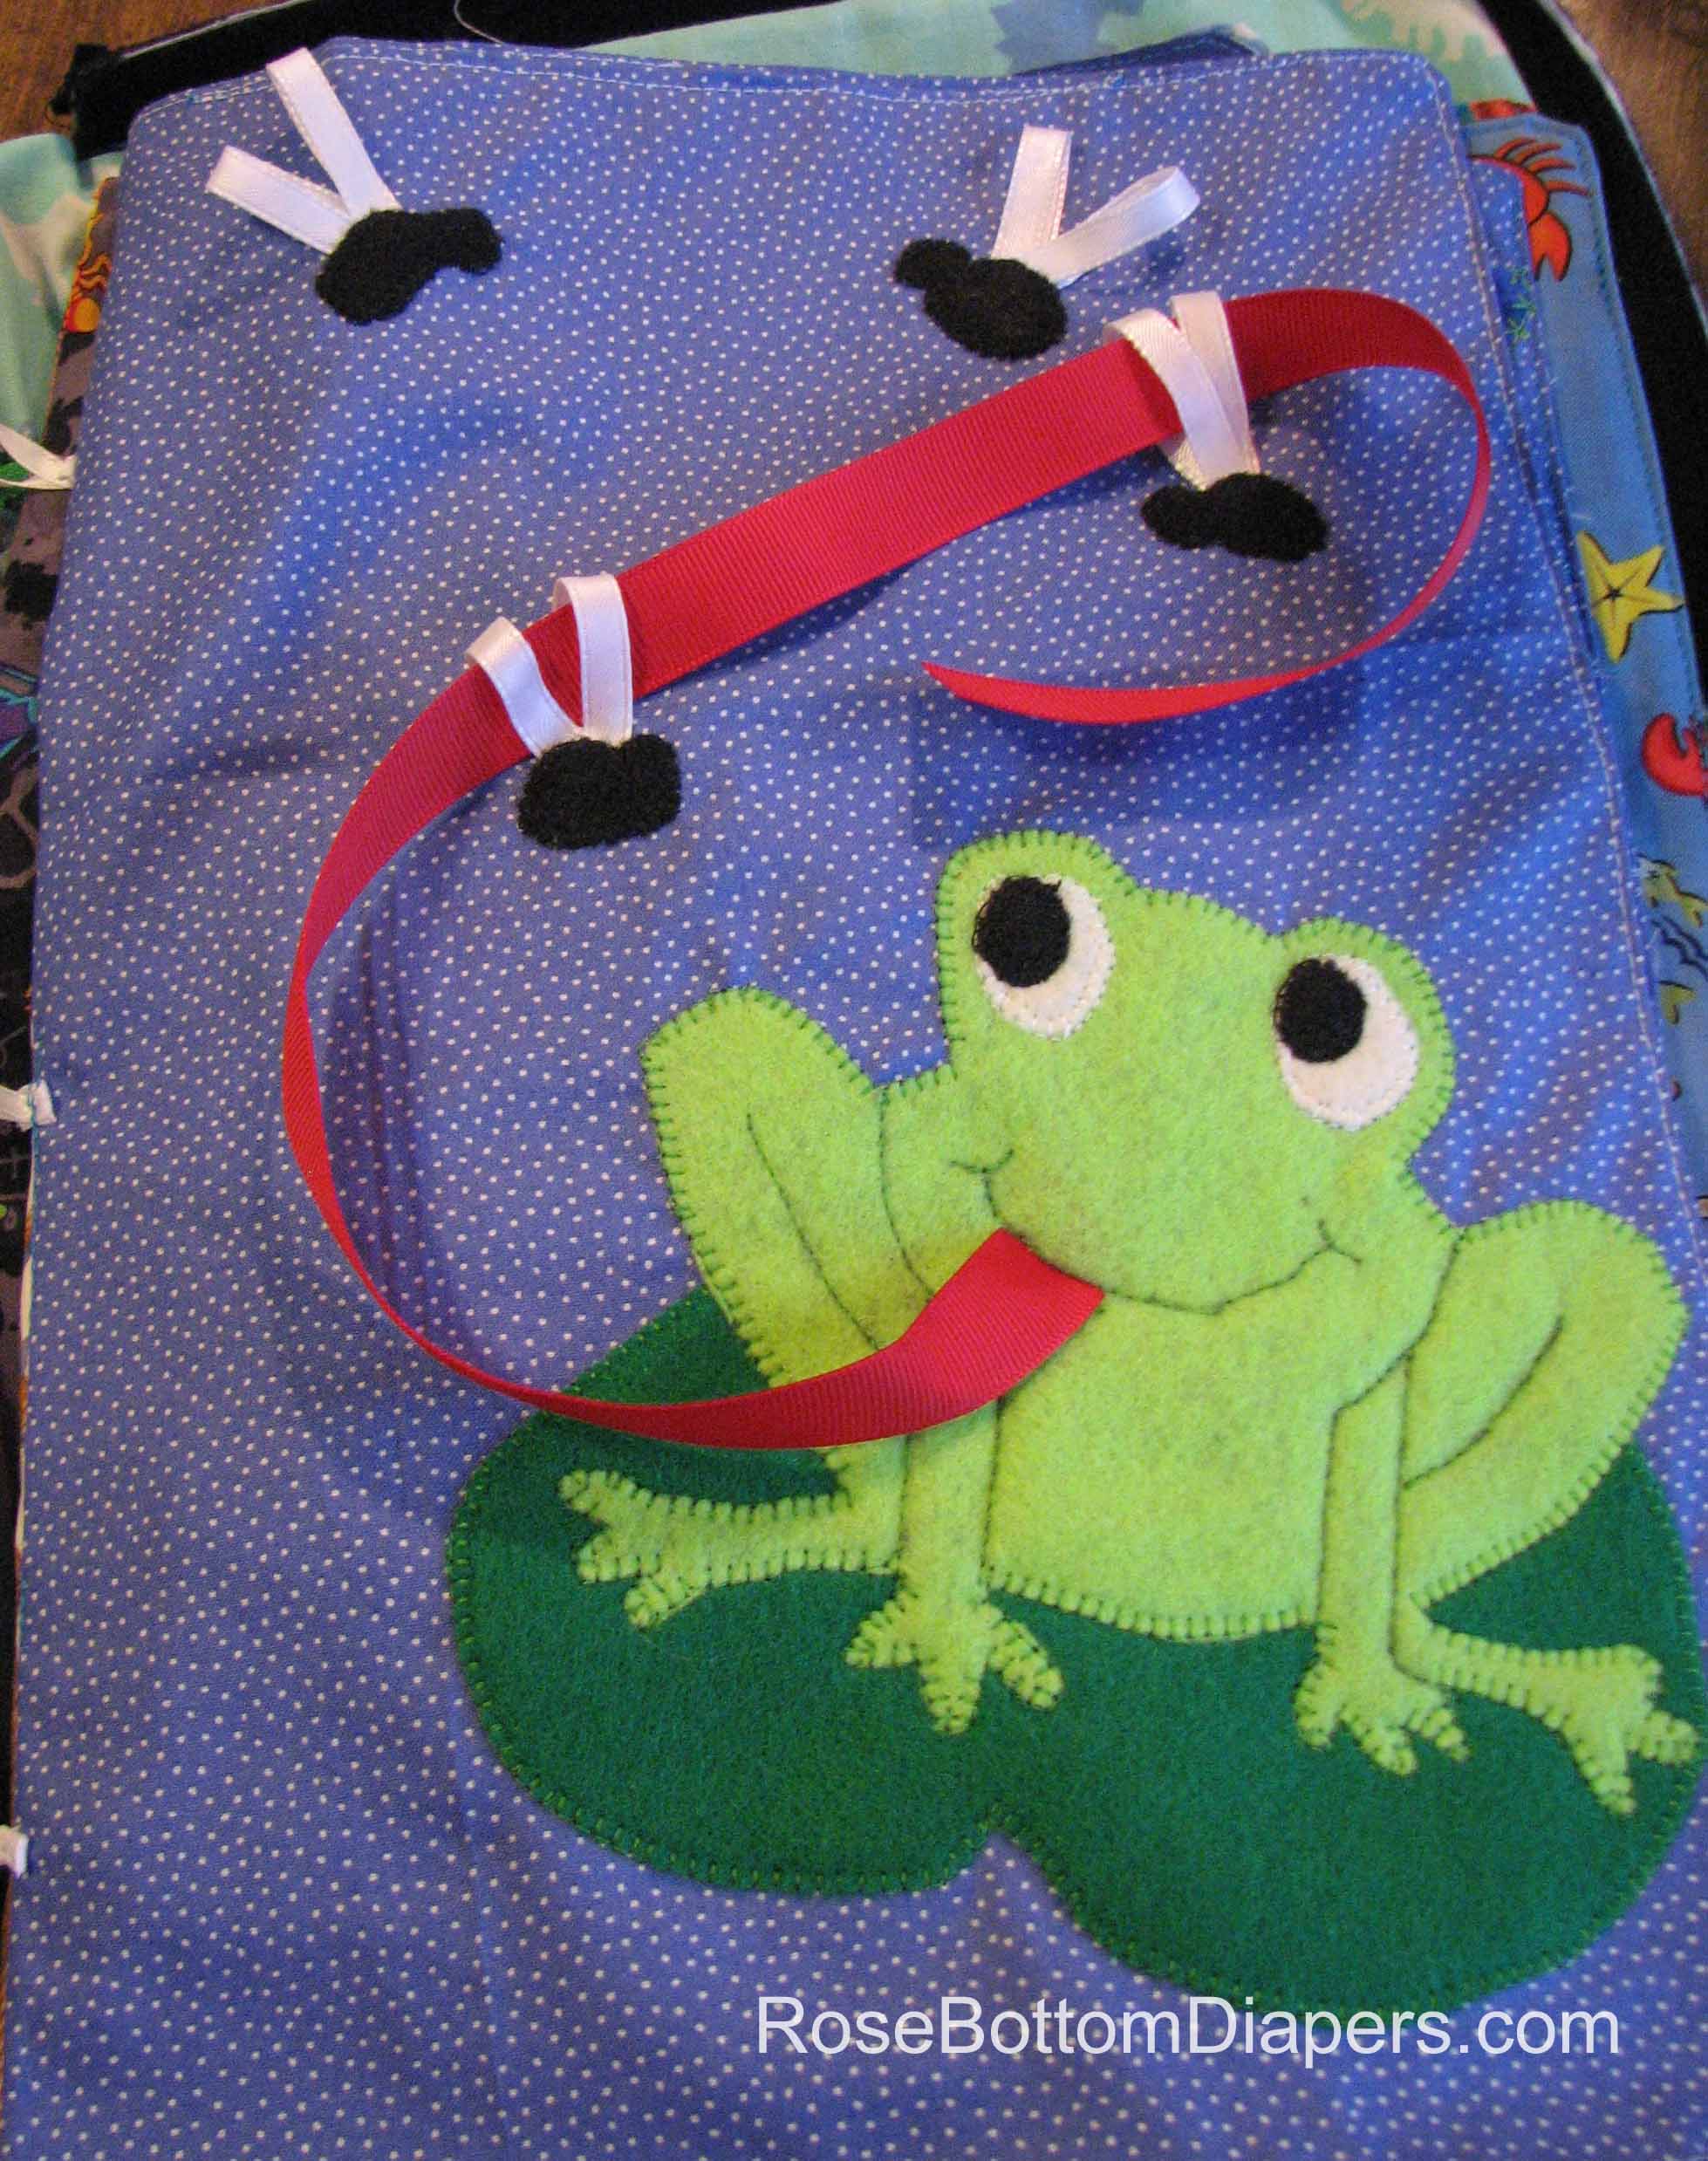 Feed the Frog quiet book page.  Cute way for toddlers to build motor skills.   Busy book ideas at RoseBottomDiapers.com